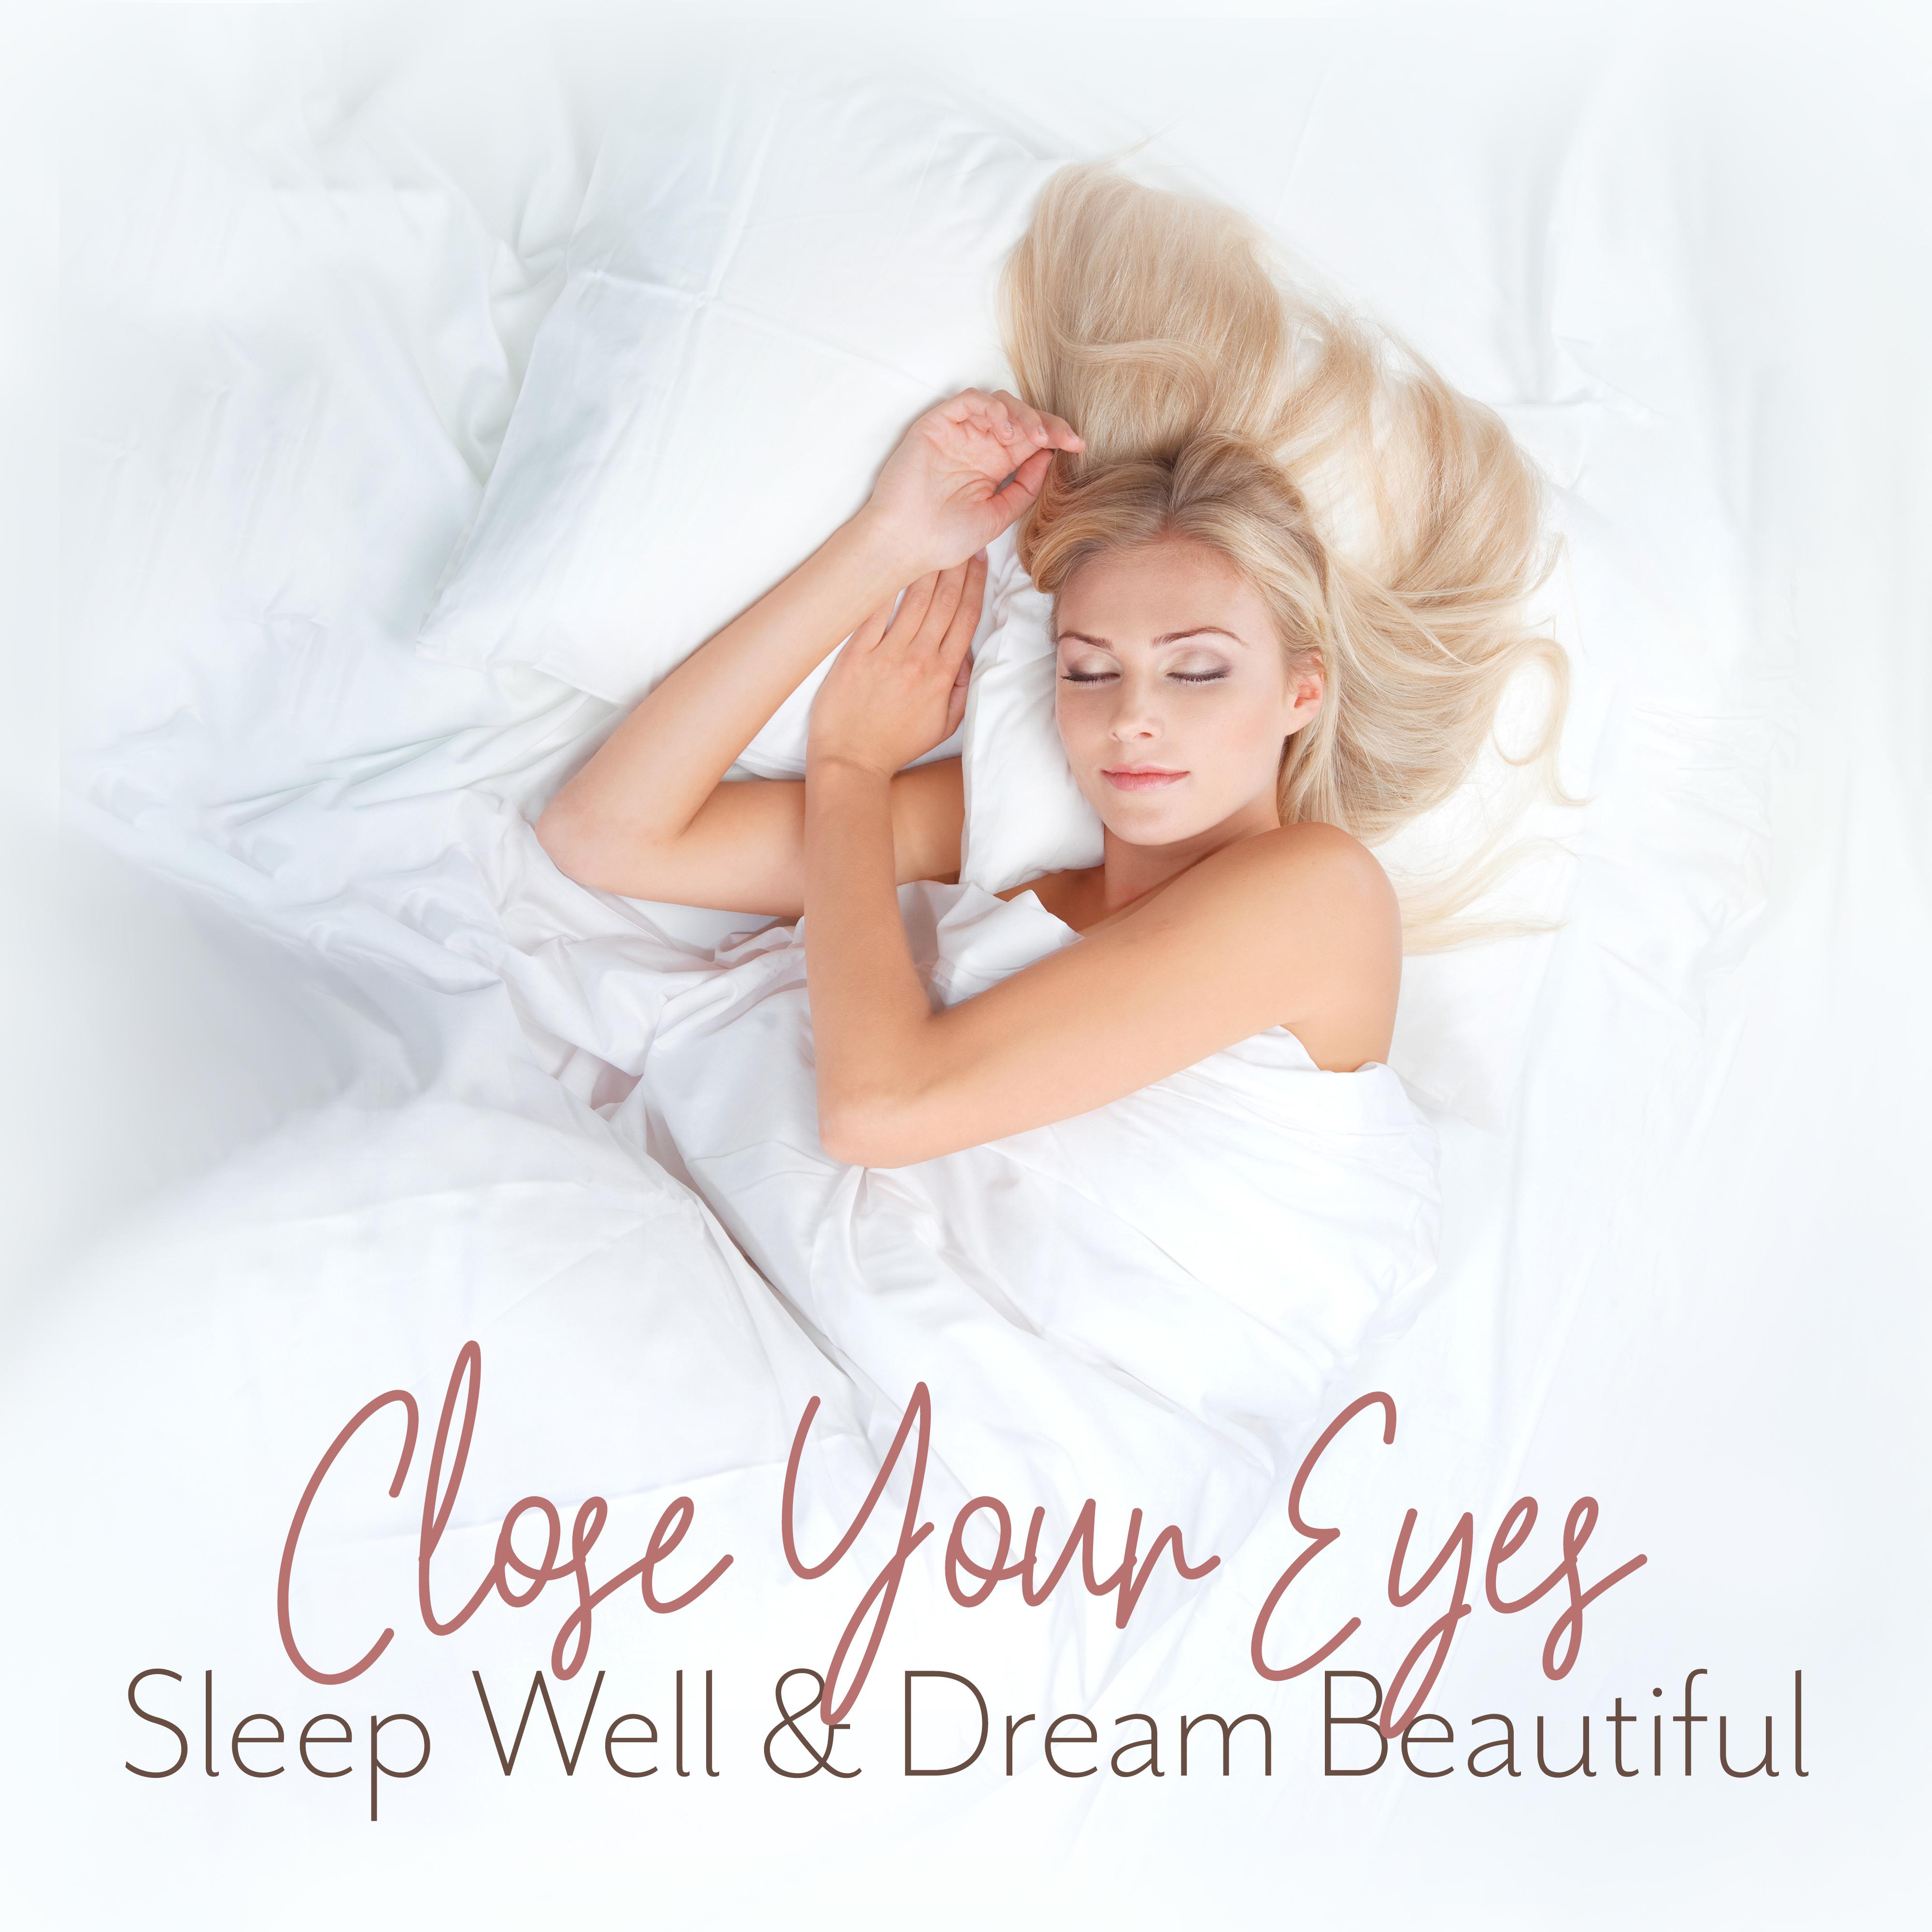 Close Your Eyes, Sleep Well  Dream Beautiful  2019 New Age Music Created to Help You Fall Asleep, Cure Insomnia, Rest  Relax, Dream Beautiful, Sleep Perfectly